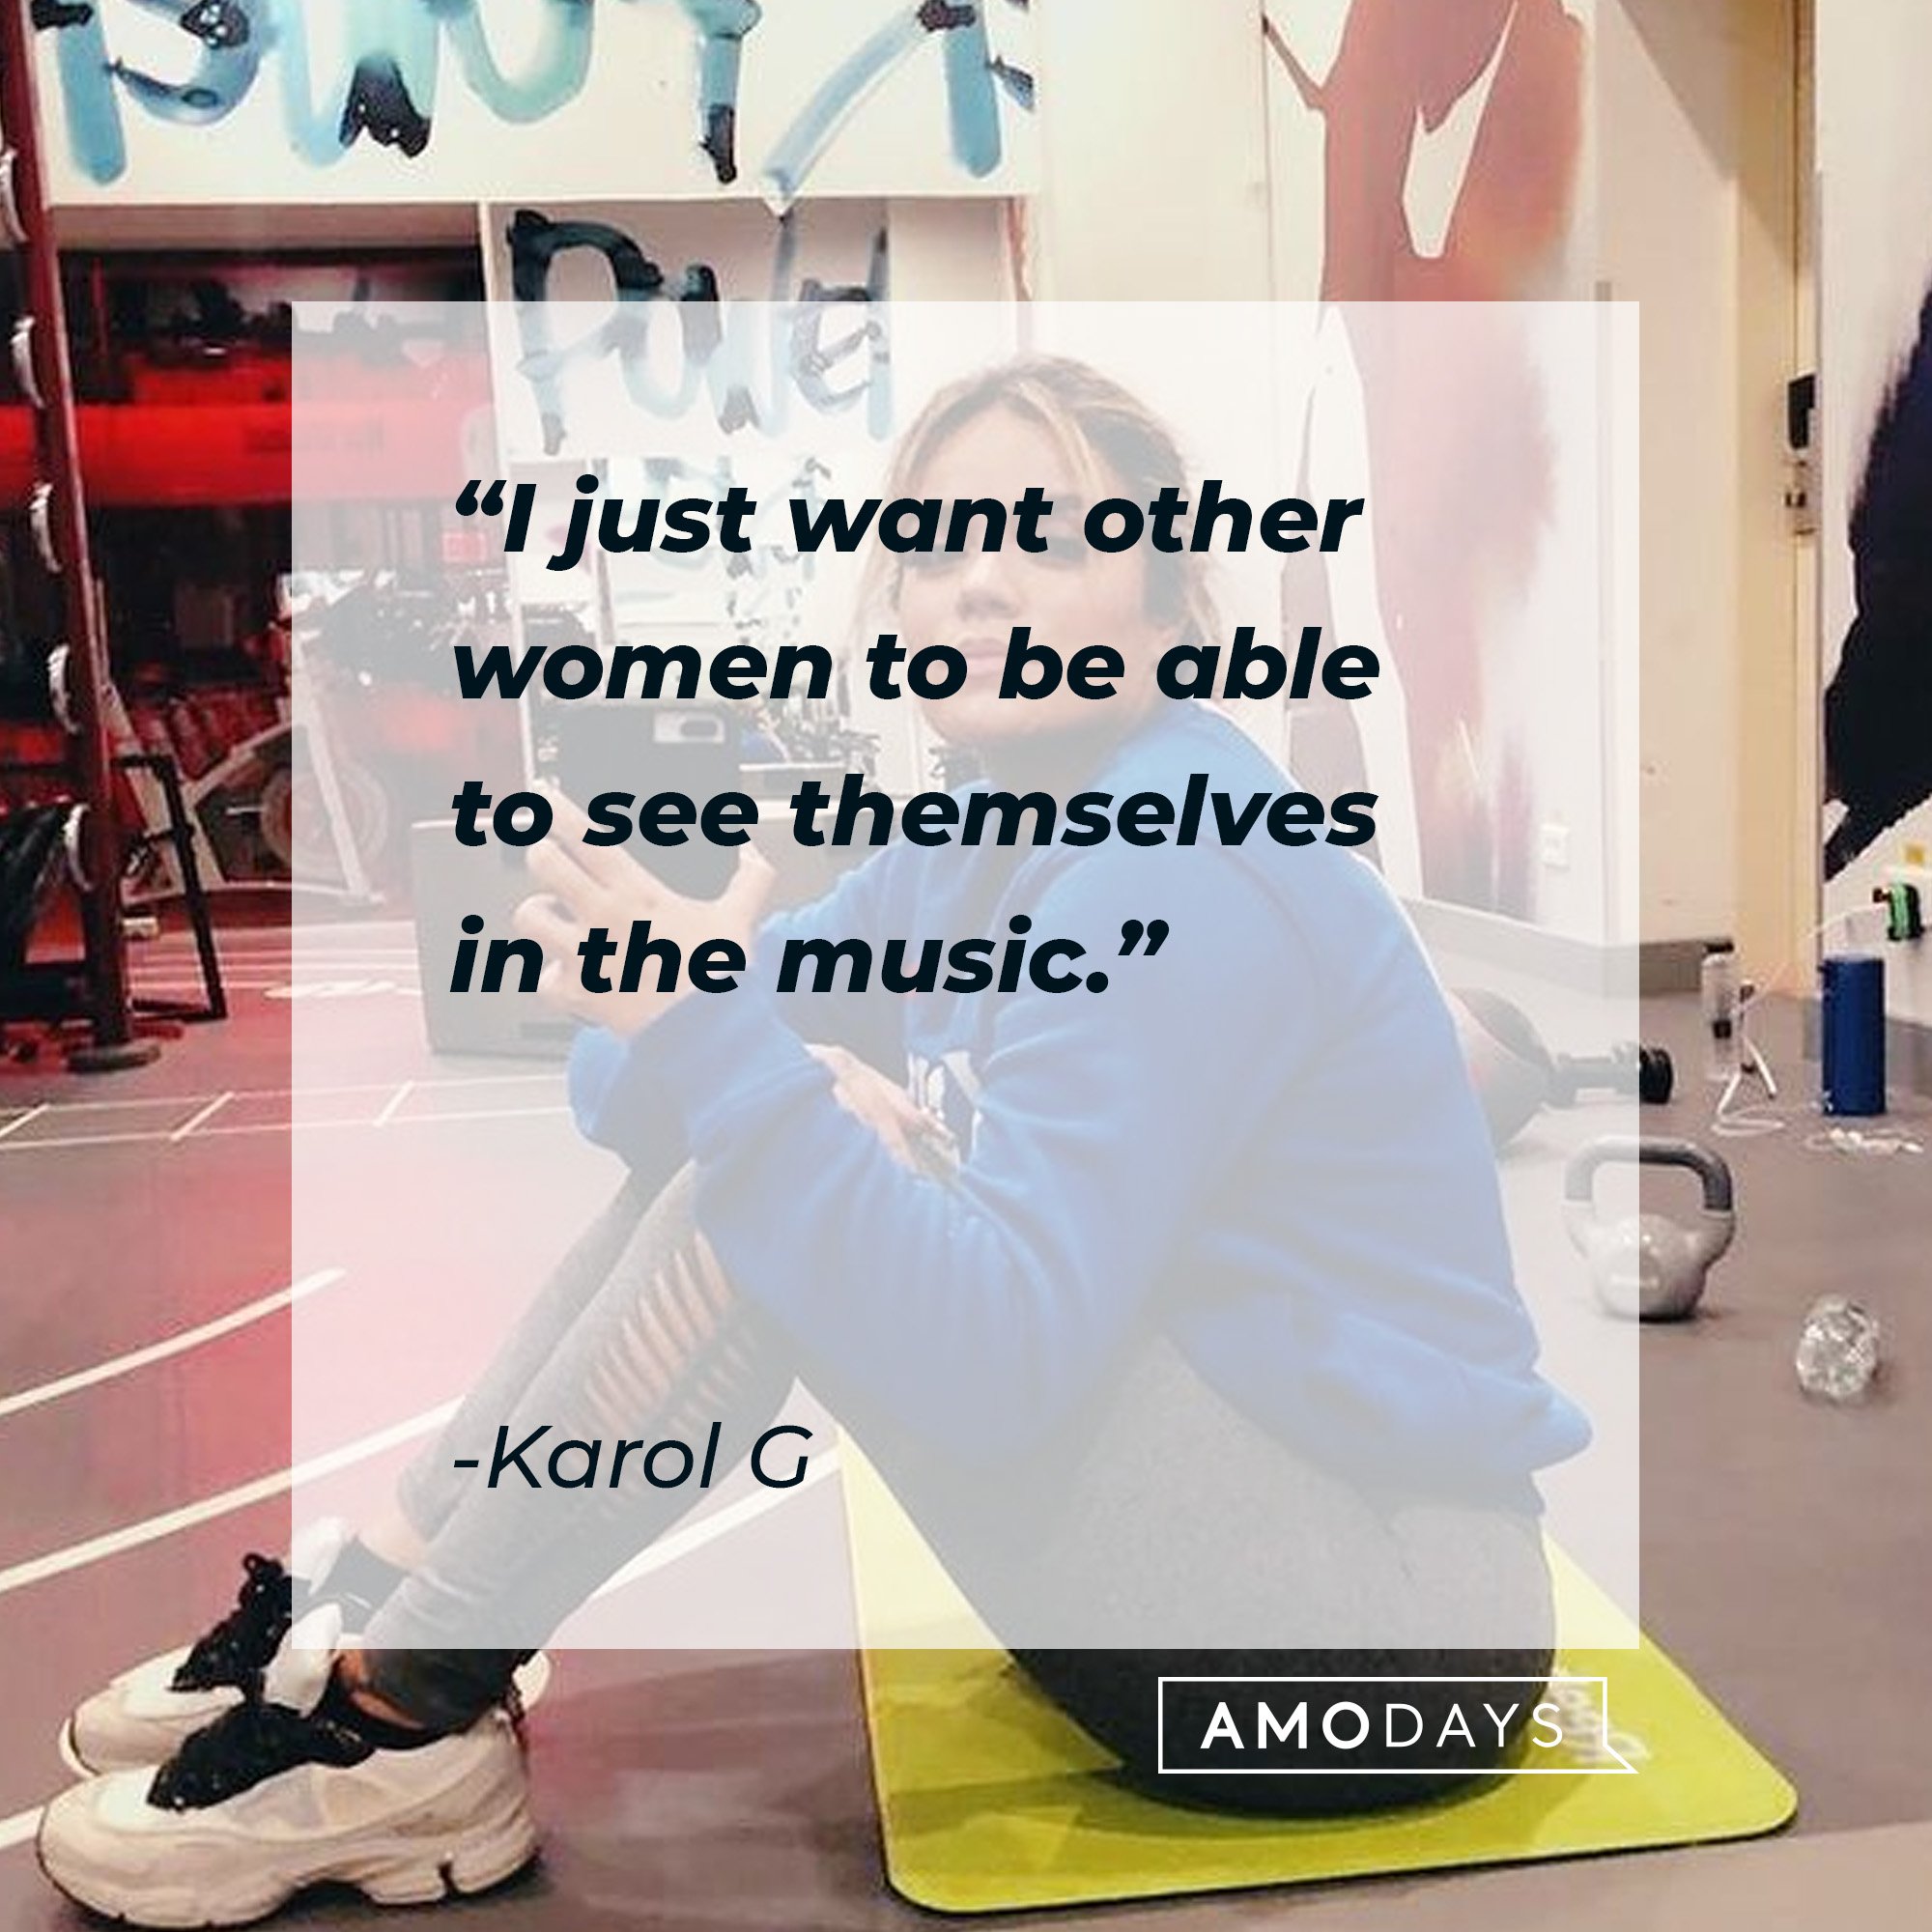 Karol G’s quote: “I just want other women to be able to see themselves in the music." | Image: AmoDays